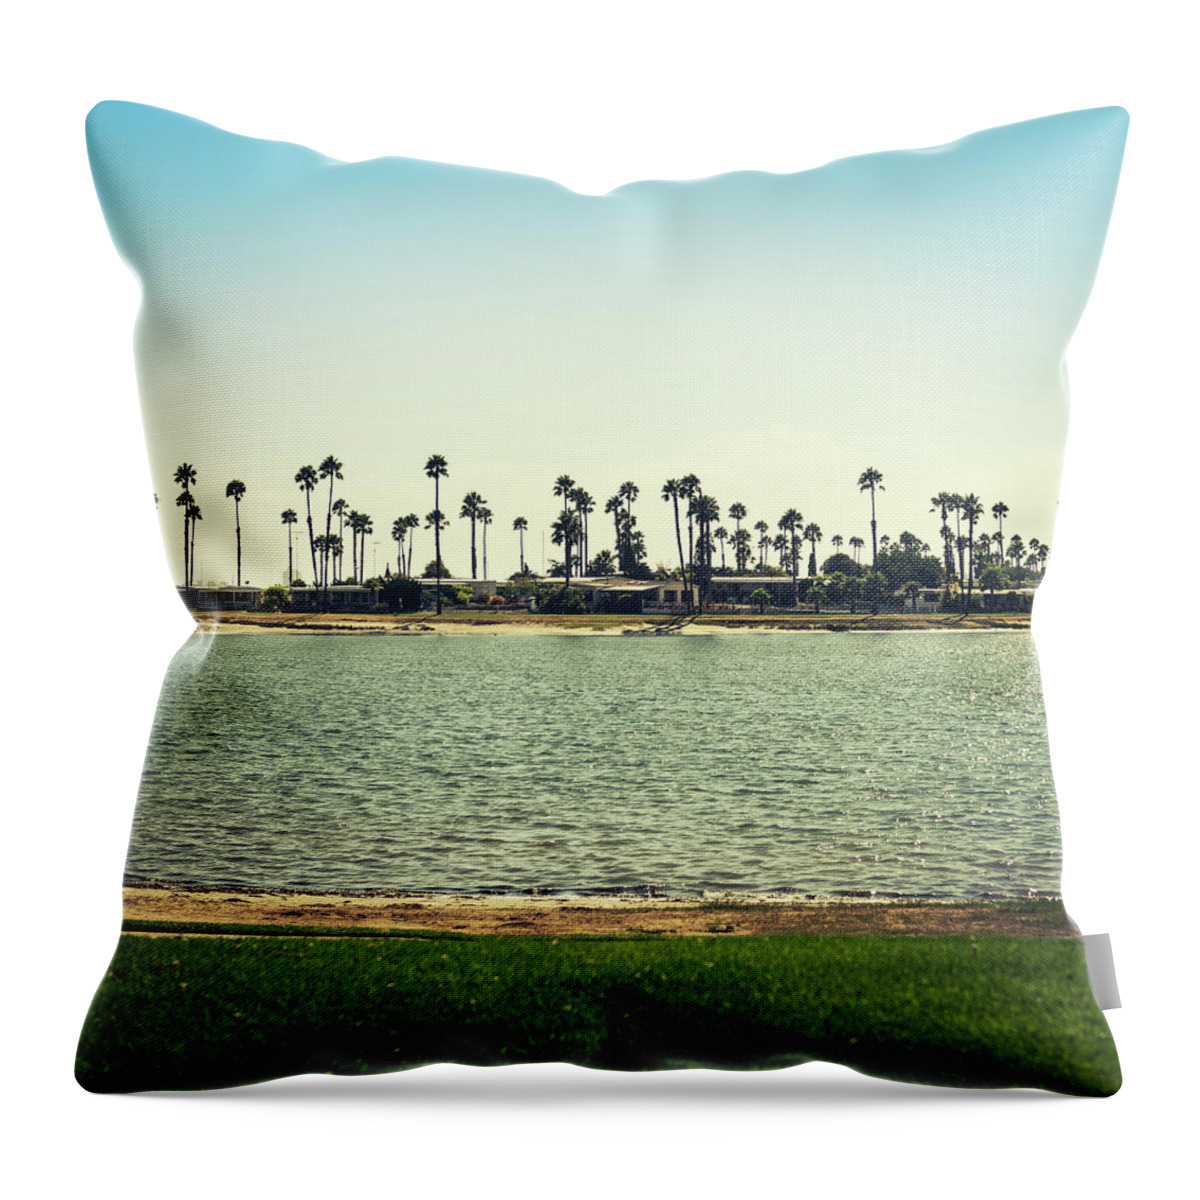 Tropical Tree Throw Pillow featuring the photograph Island Palm Tree In San Diego by Franckreporter